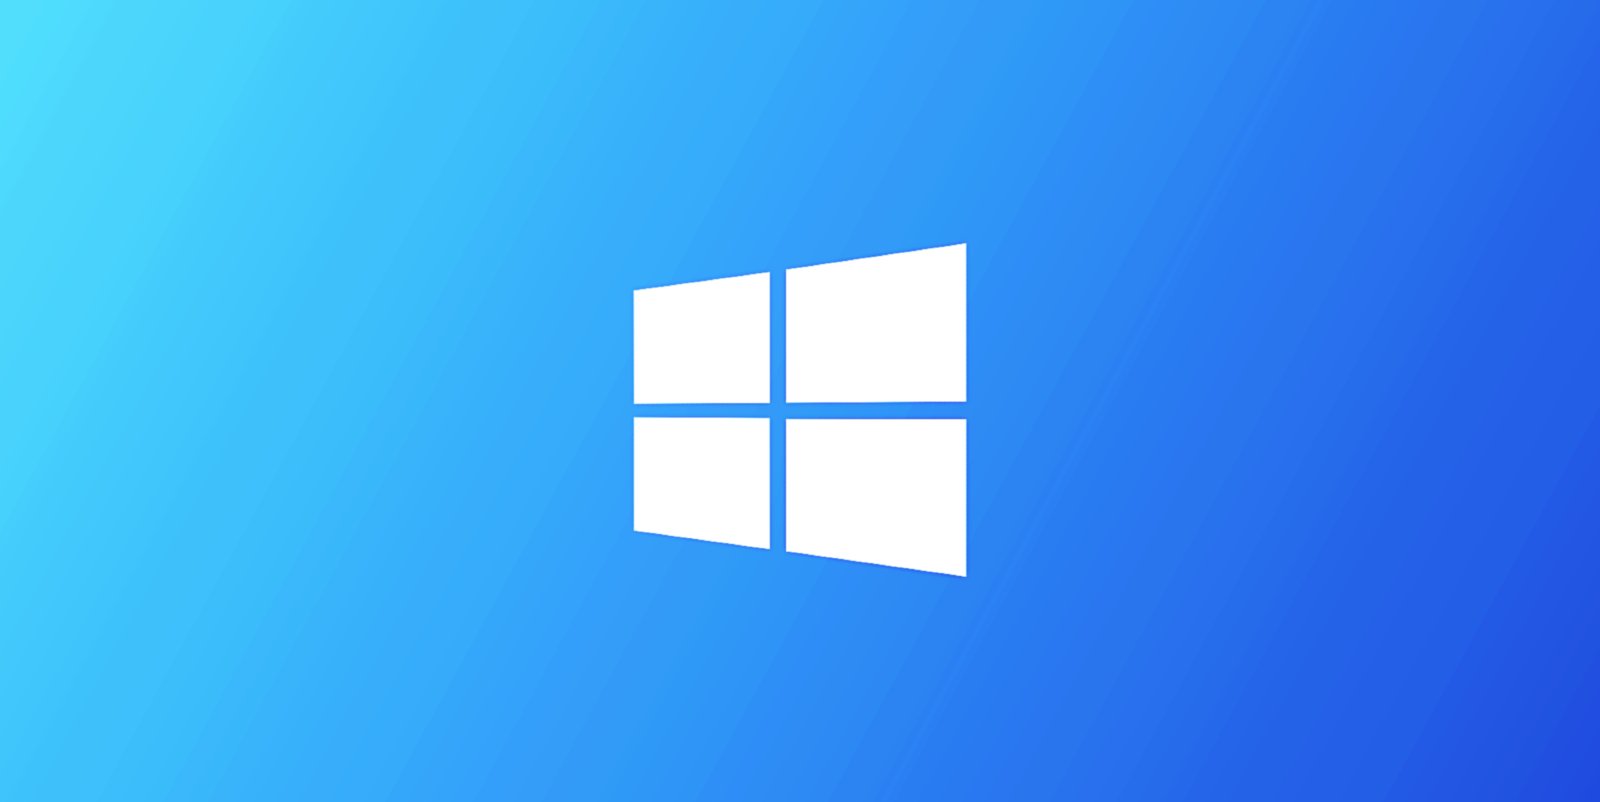 Windows 10 is gaining these nifty enhancements in the next update